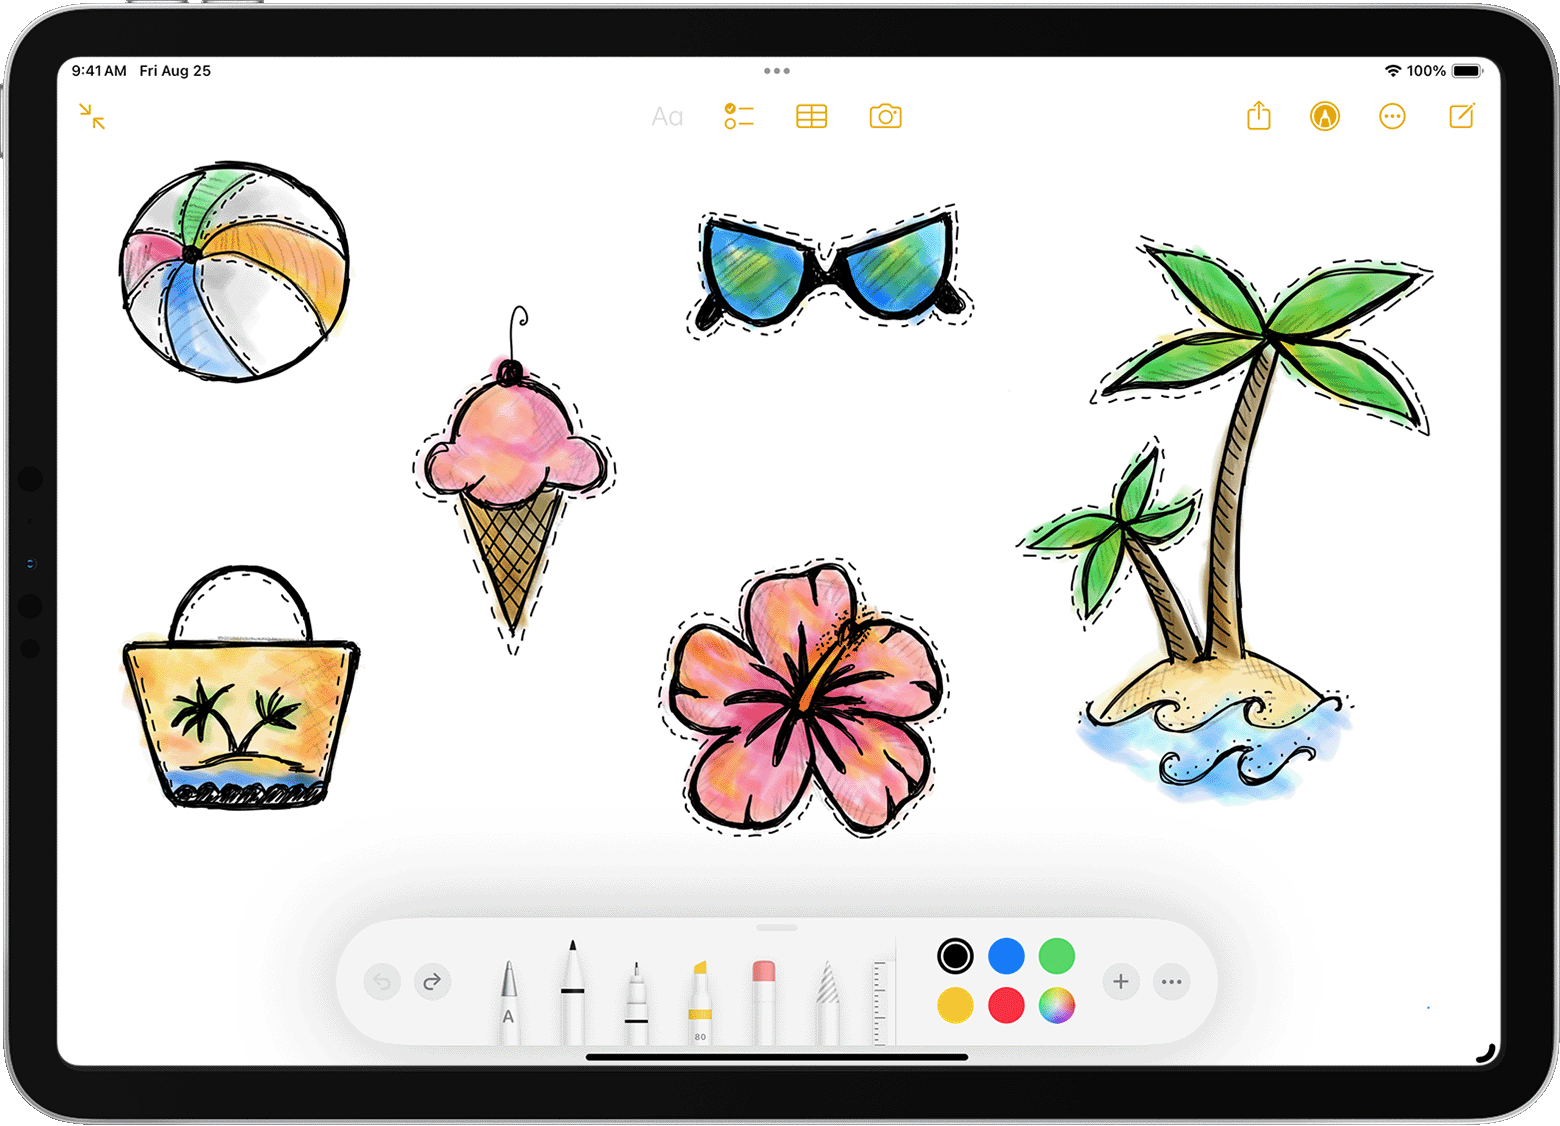 iPad showing images drawn with Apple Pencil